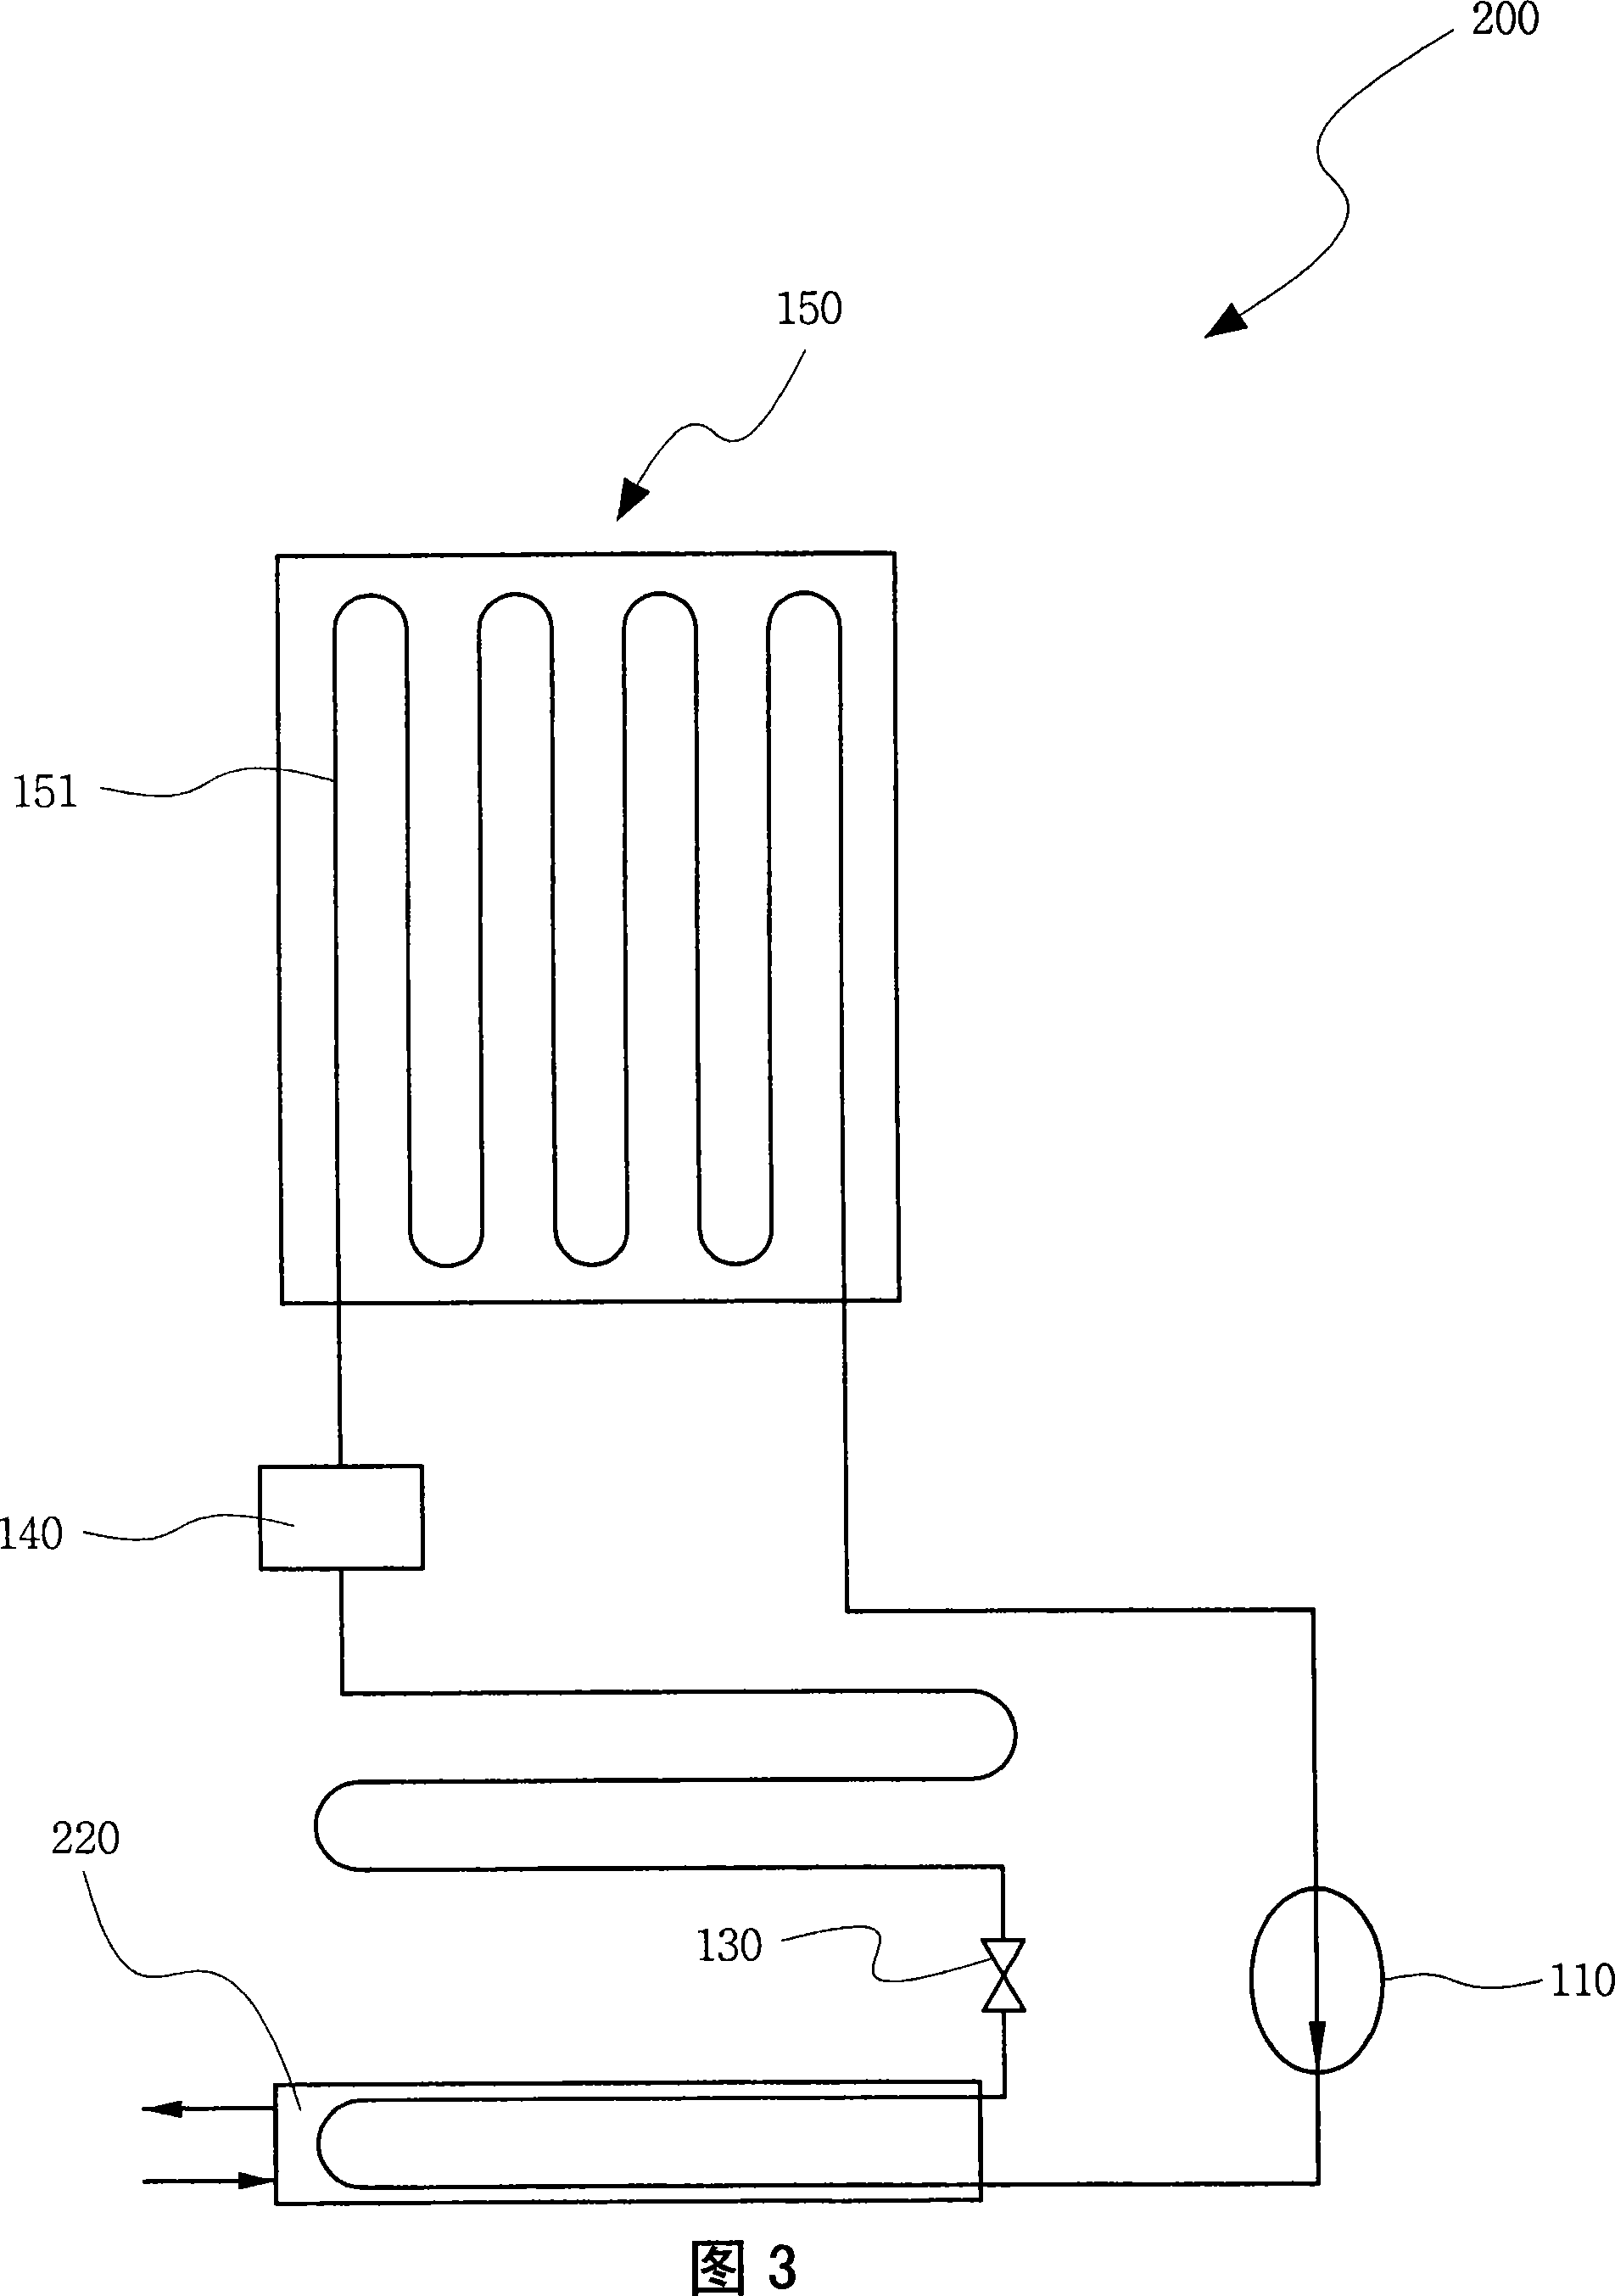 Partial radiation cooling device